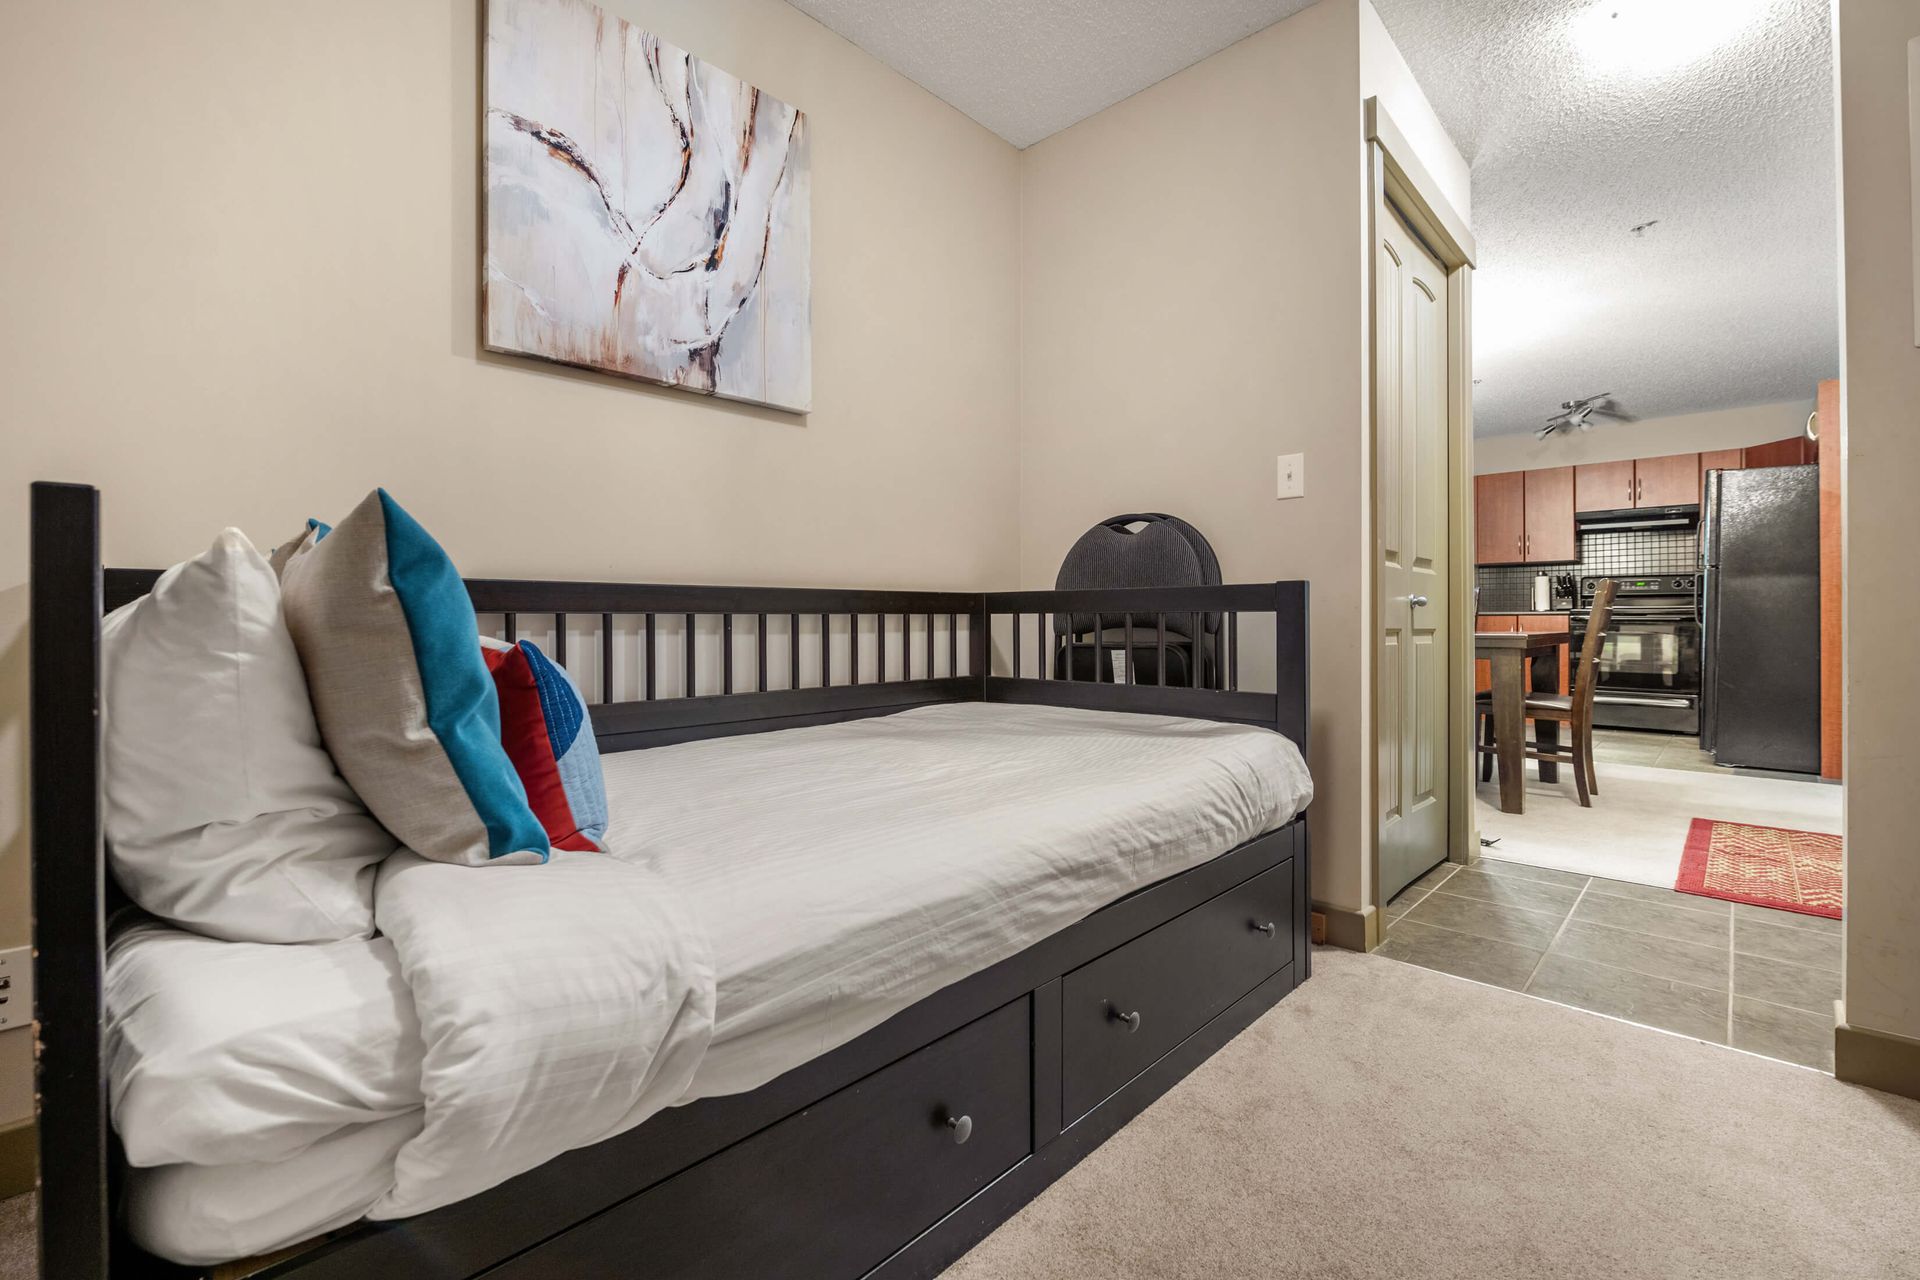 Den at the Lake Windermere Pointe Condos in Invermere, BC managed by Aisling Baile Property Management